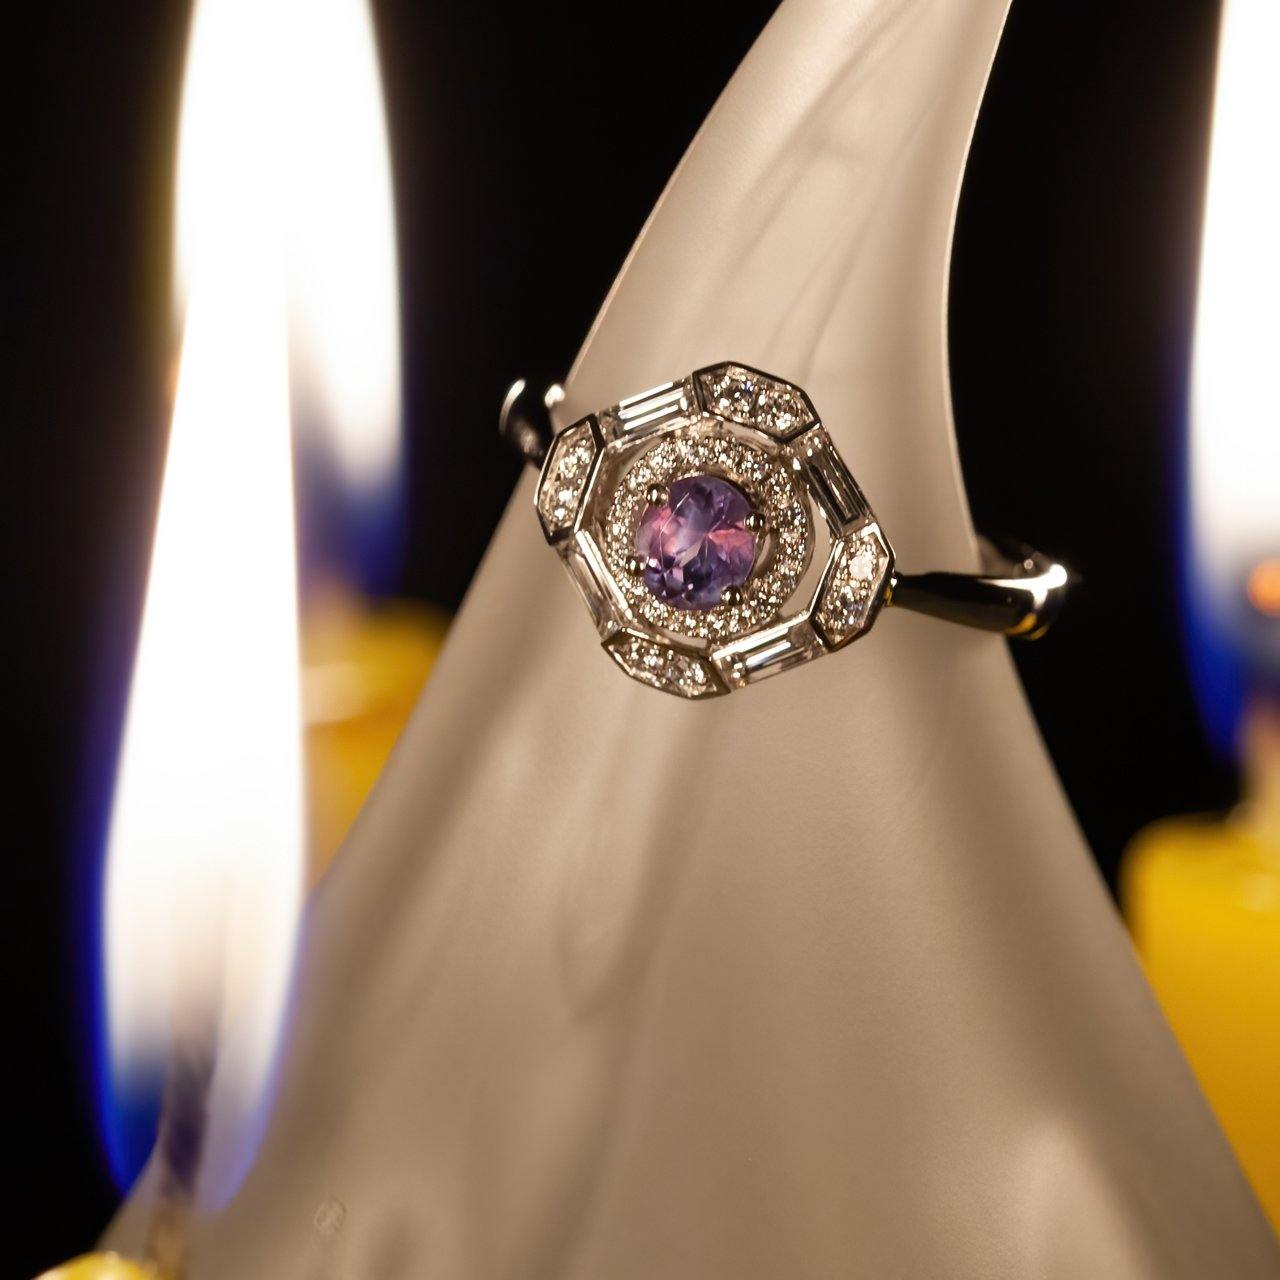 A 0.60ct alexandrite platinum ring showcased on a candle, reflecting purple hues